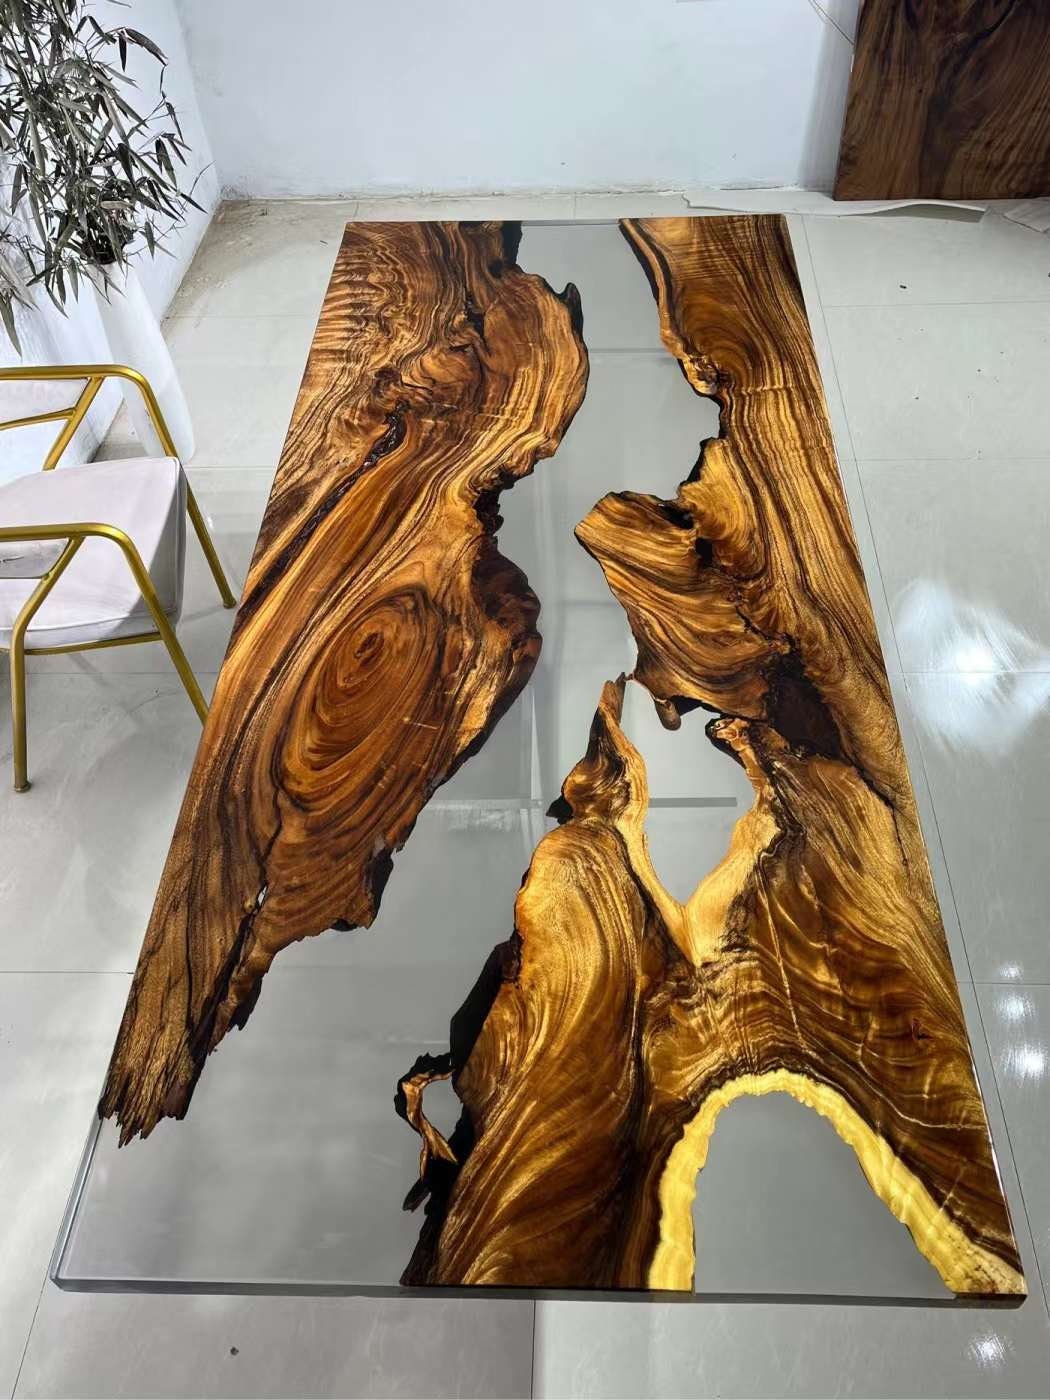 high quality Epoxy resin Dining Table, Walnut Resin Table, Special Order Walnut Epoxy Table